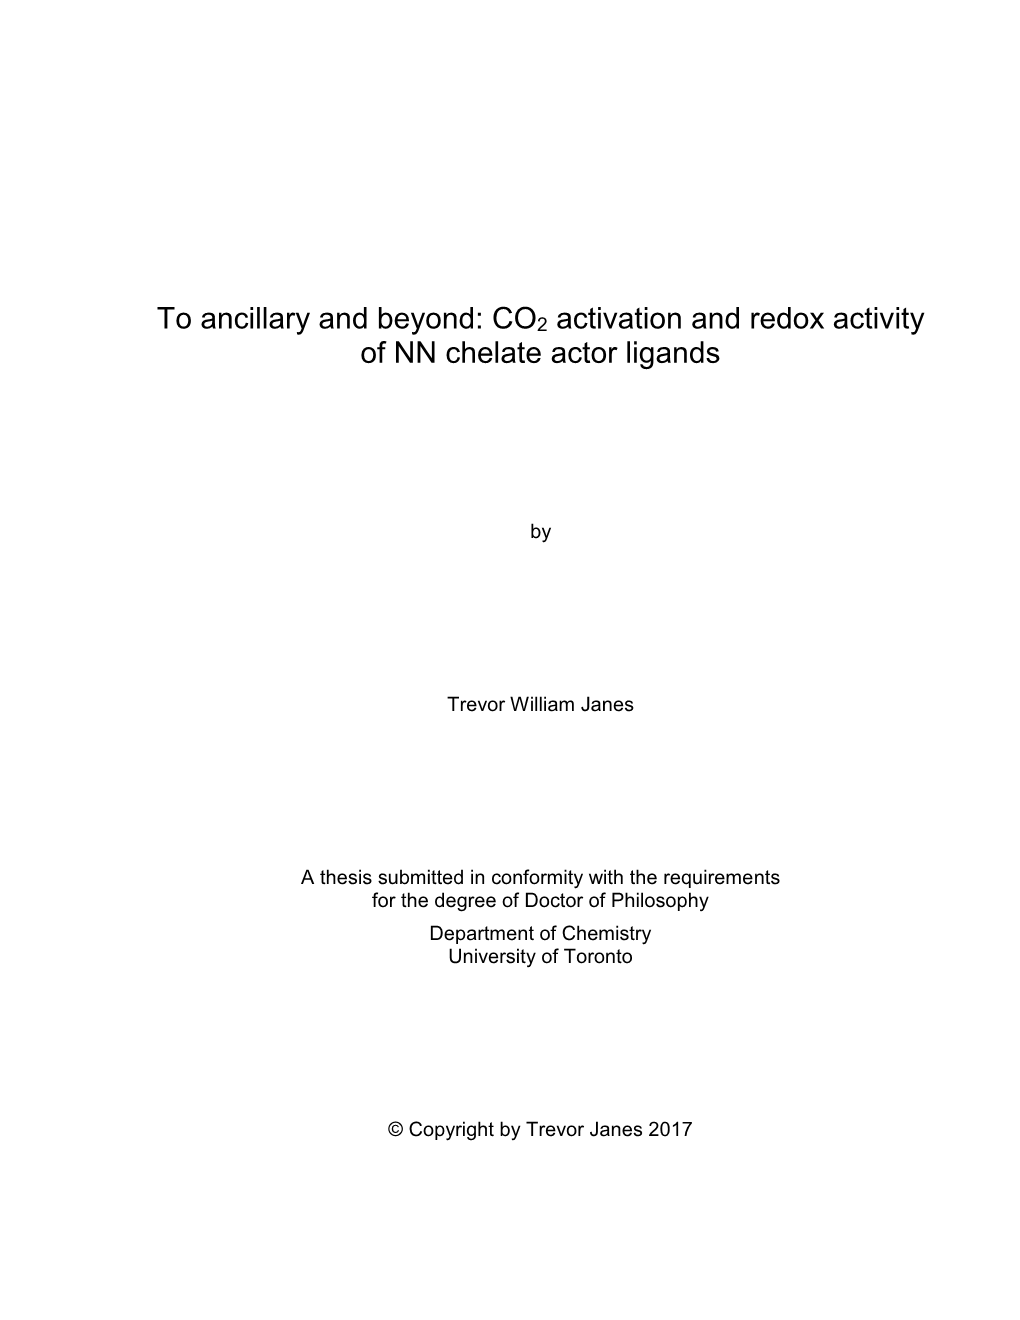 CO2 Activation and Redox Activity of NN